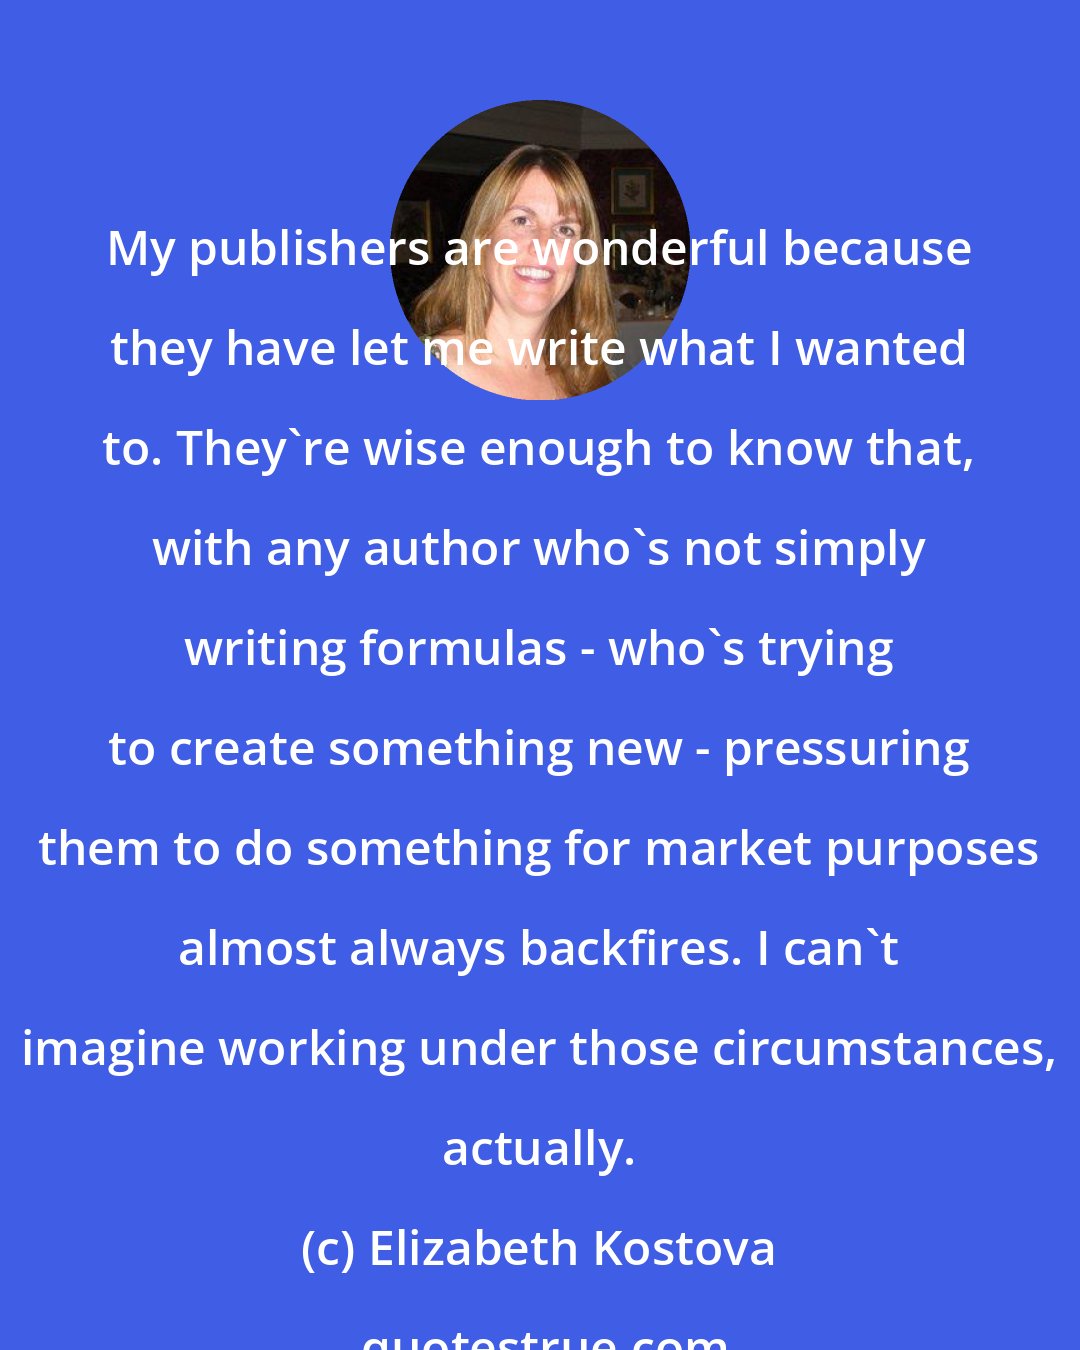 Elizabeth Kostova: My publishers are wonderful because they have let me write what I wanted to. They're wise enough to know that, with any author who's not simply writing formulas - who's trying to create something new - pressuring them to do something for market purposes almost always backfires. I can't imagine working under those circumstances, actually.